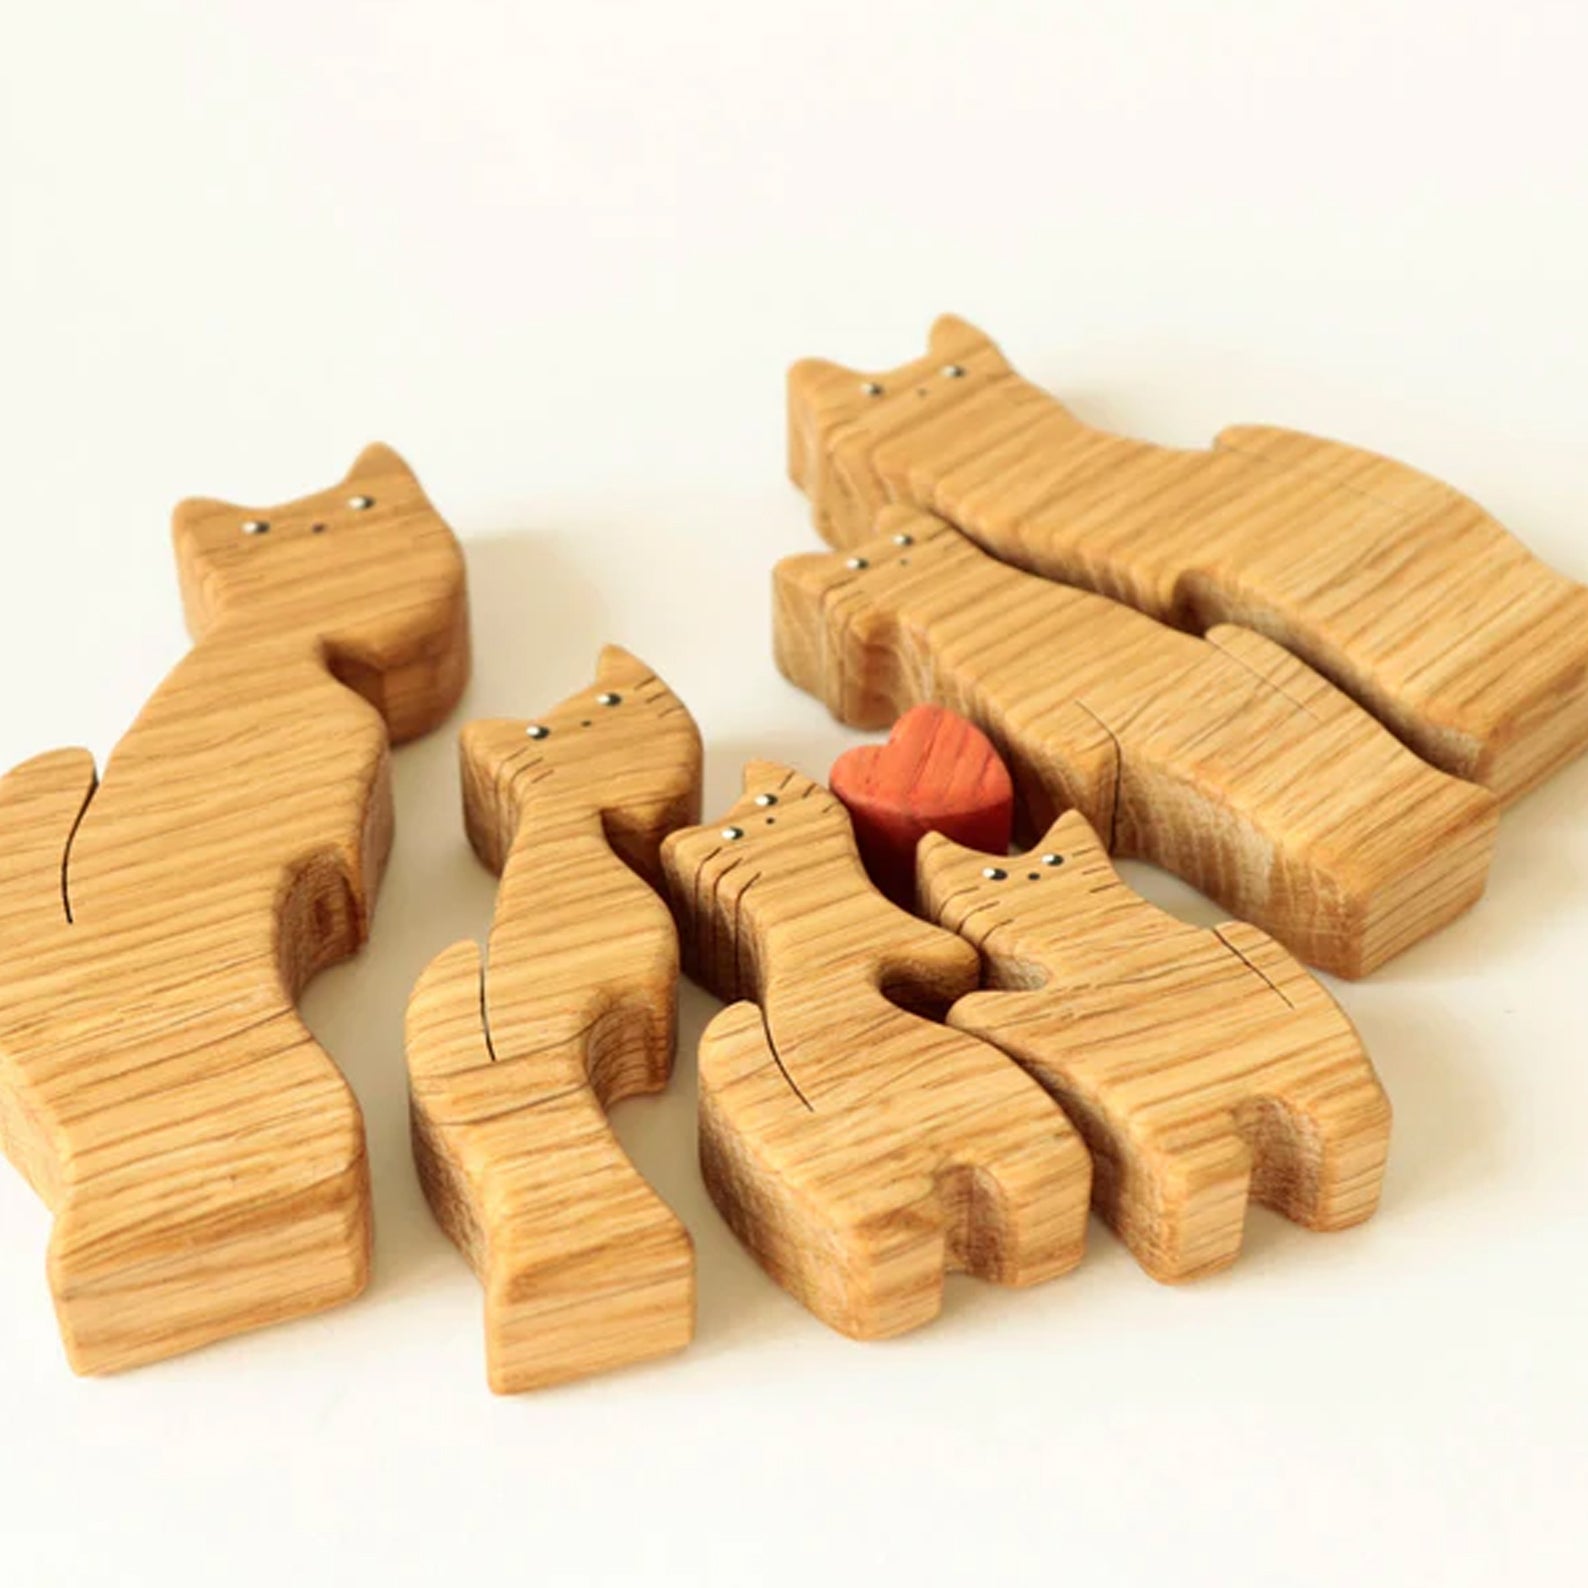 Personalized Cat Family, Wooden Puzzle Gift for Home Decoration - Upto 6 Members - Shaggy Chic